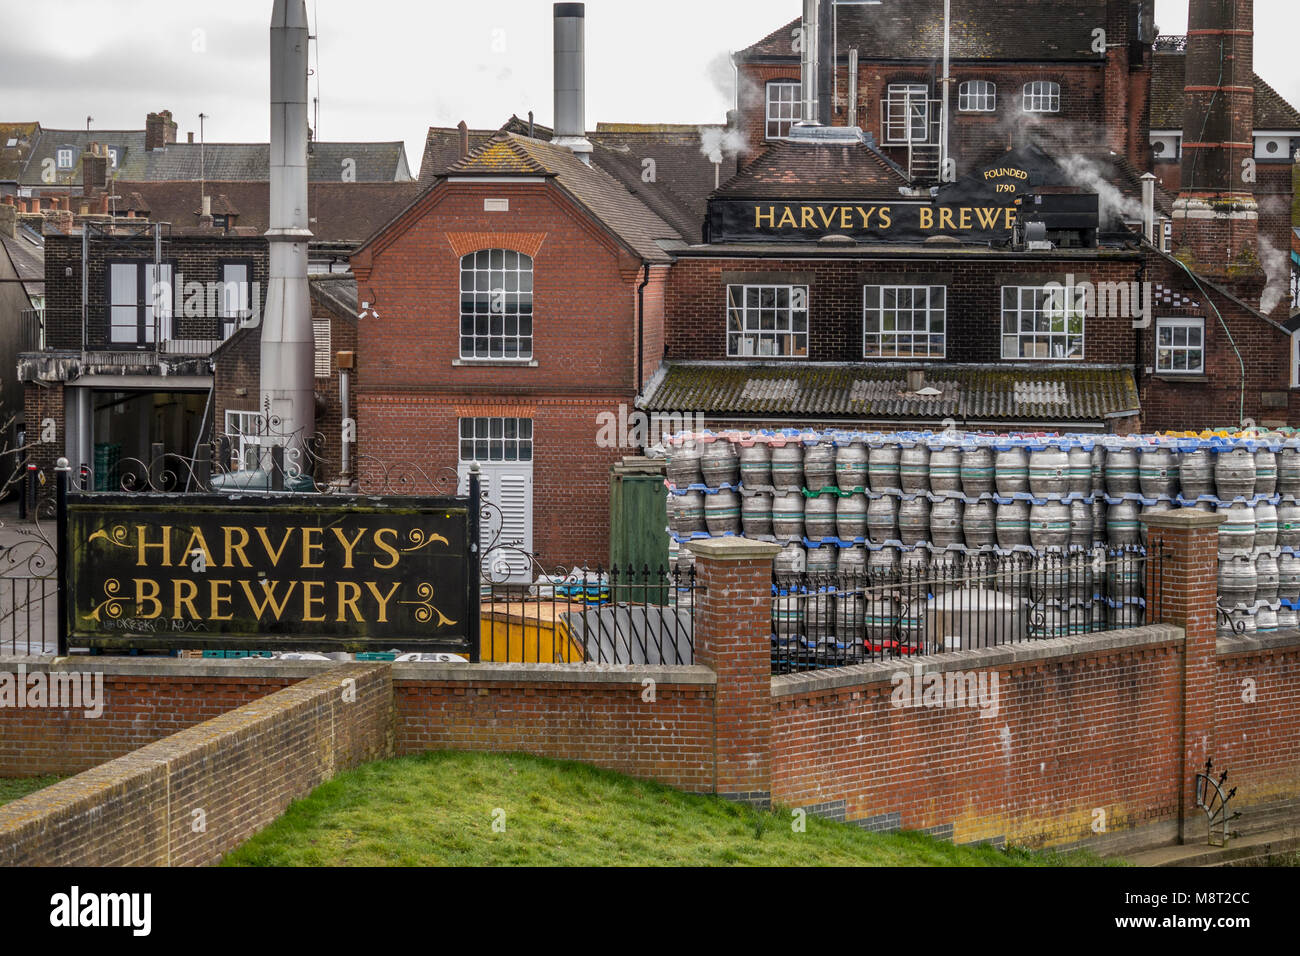 Harvey's brewery - Lewes, East Sussex, England, UK. Stock Photo